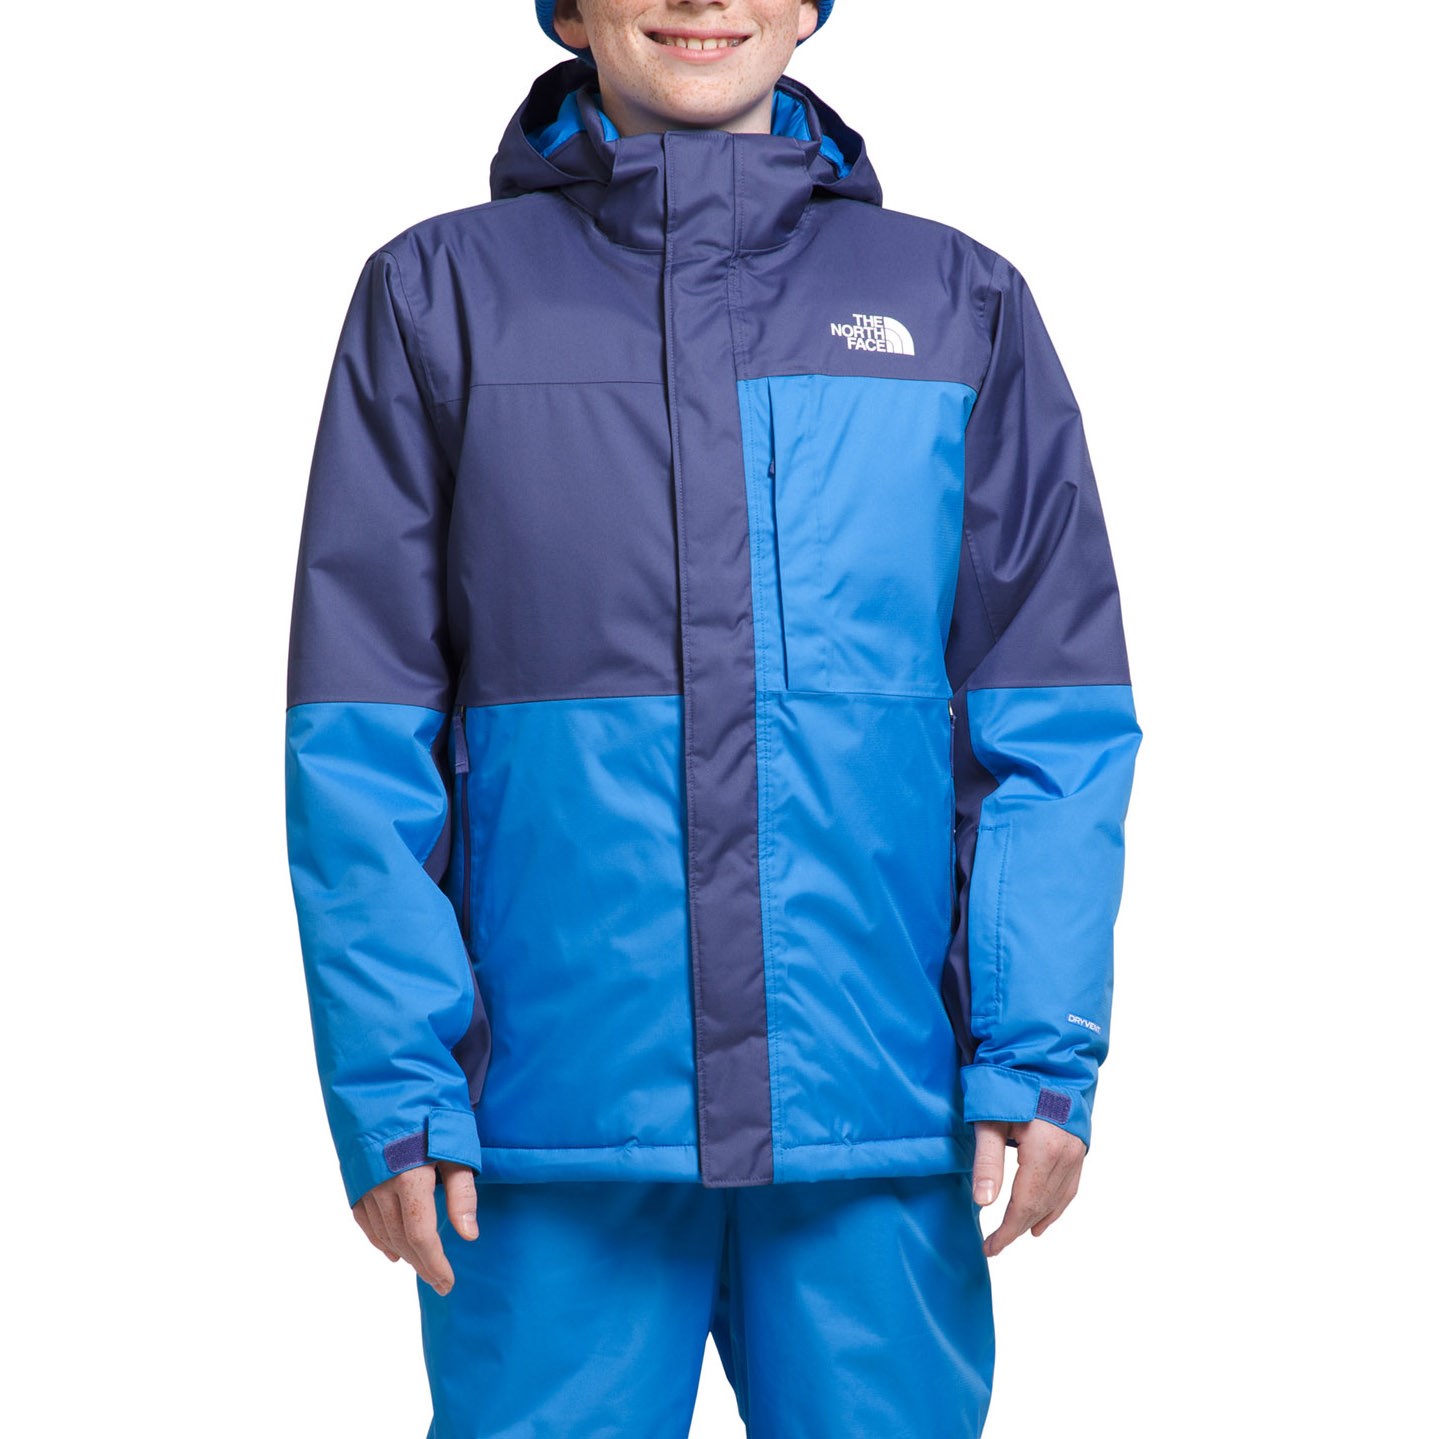 The North Face Flare Insulated Jacket Men's